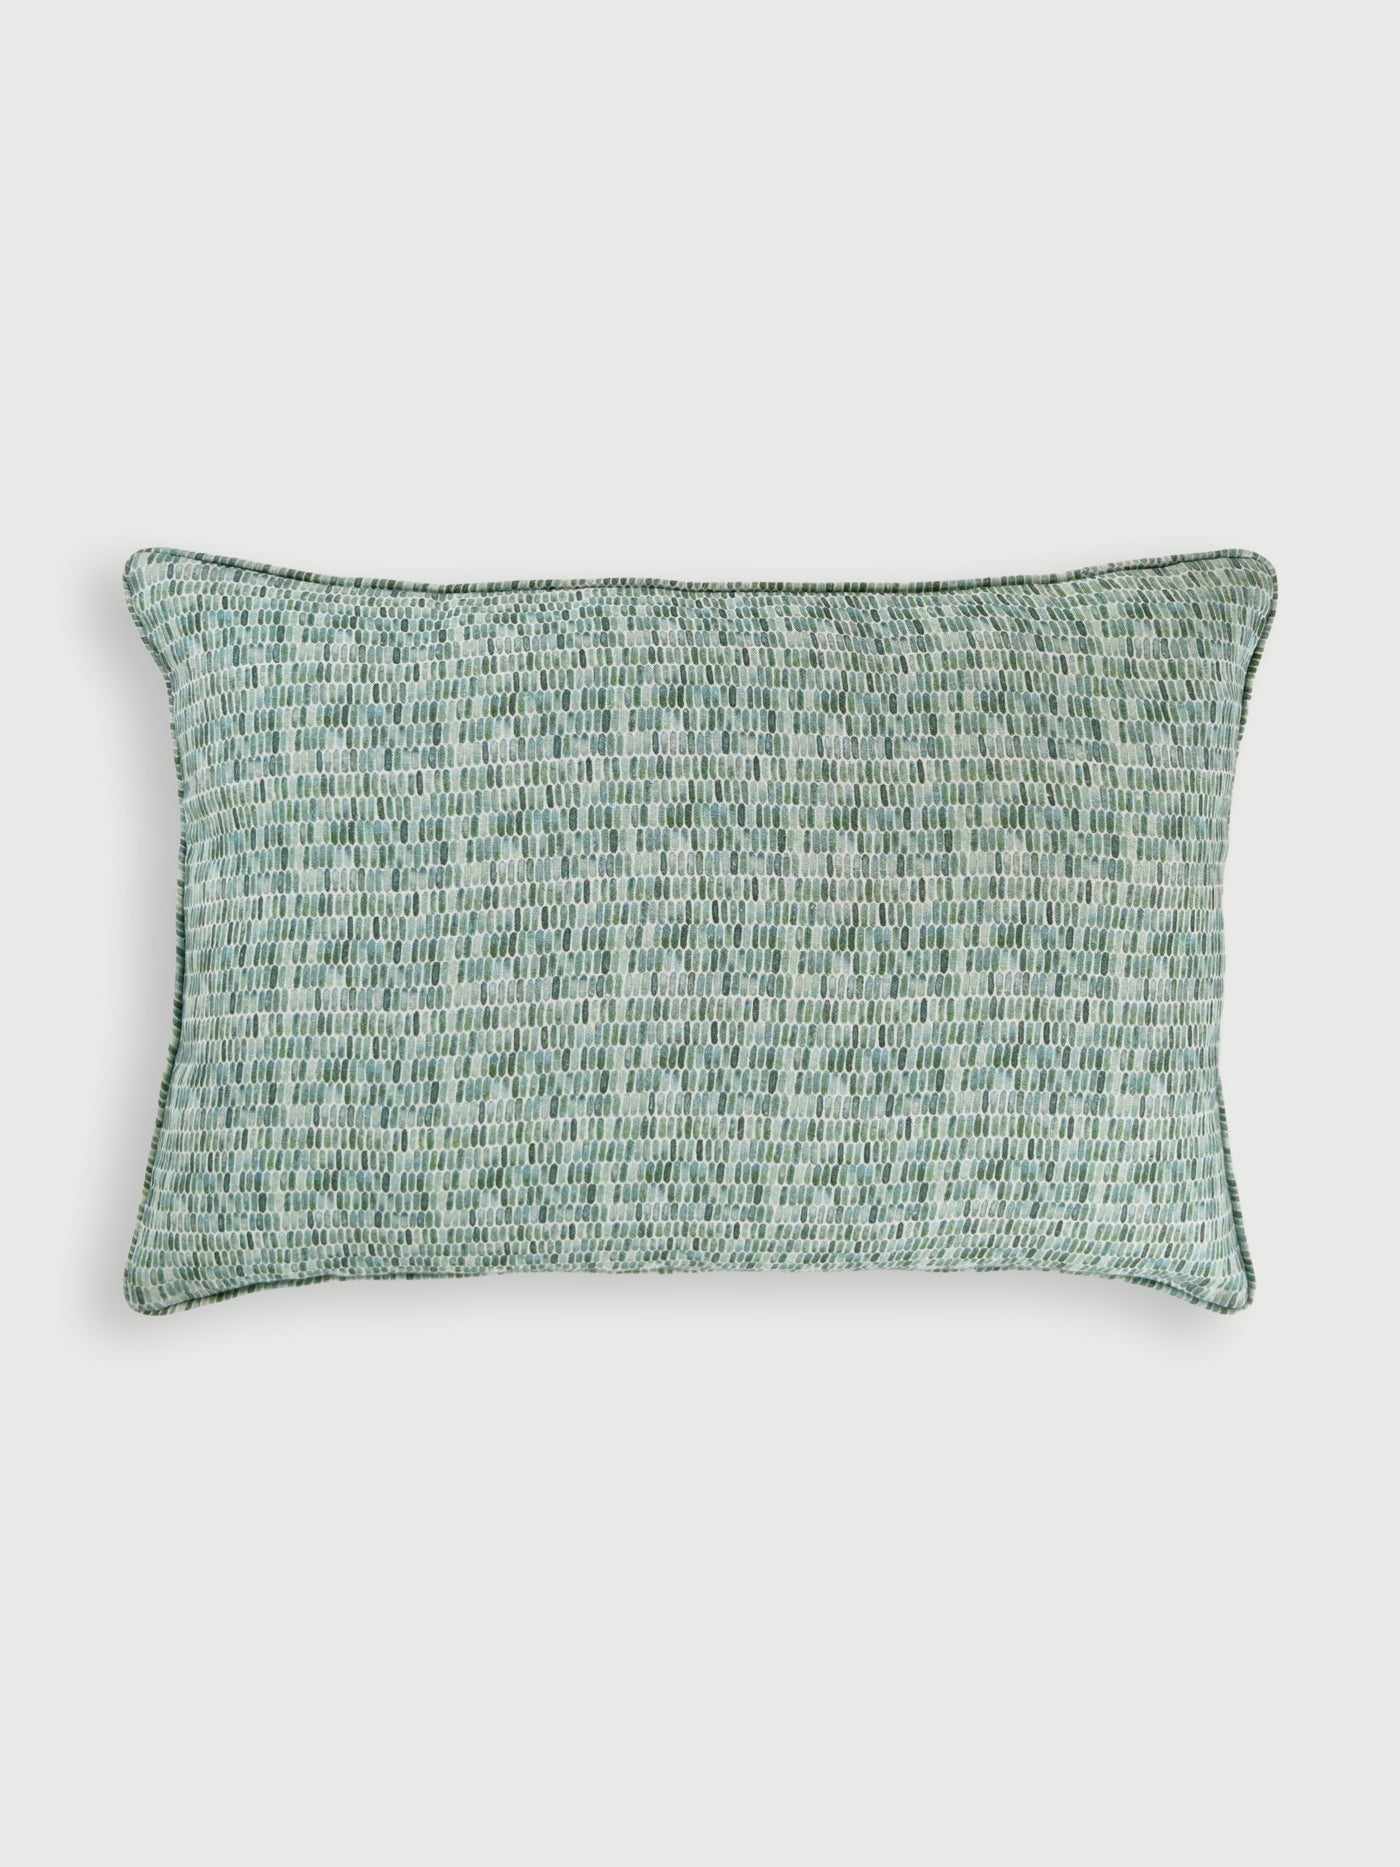 Speckle Teal Linen Oblong Cushion Cover